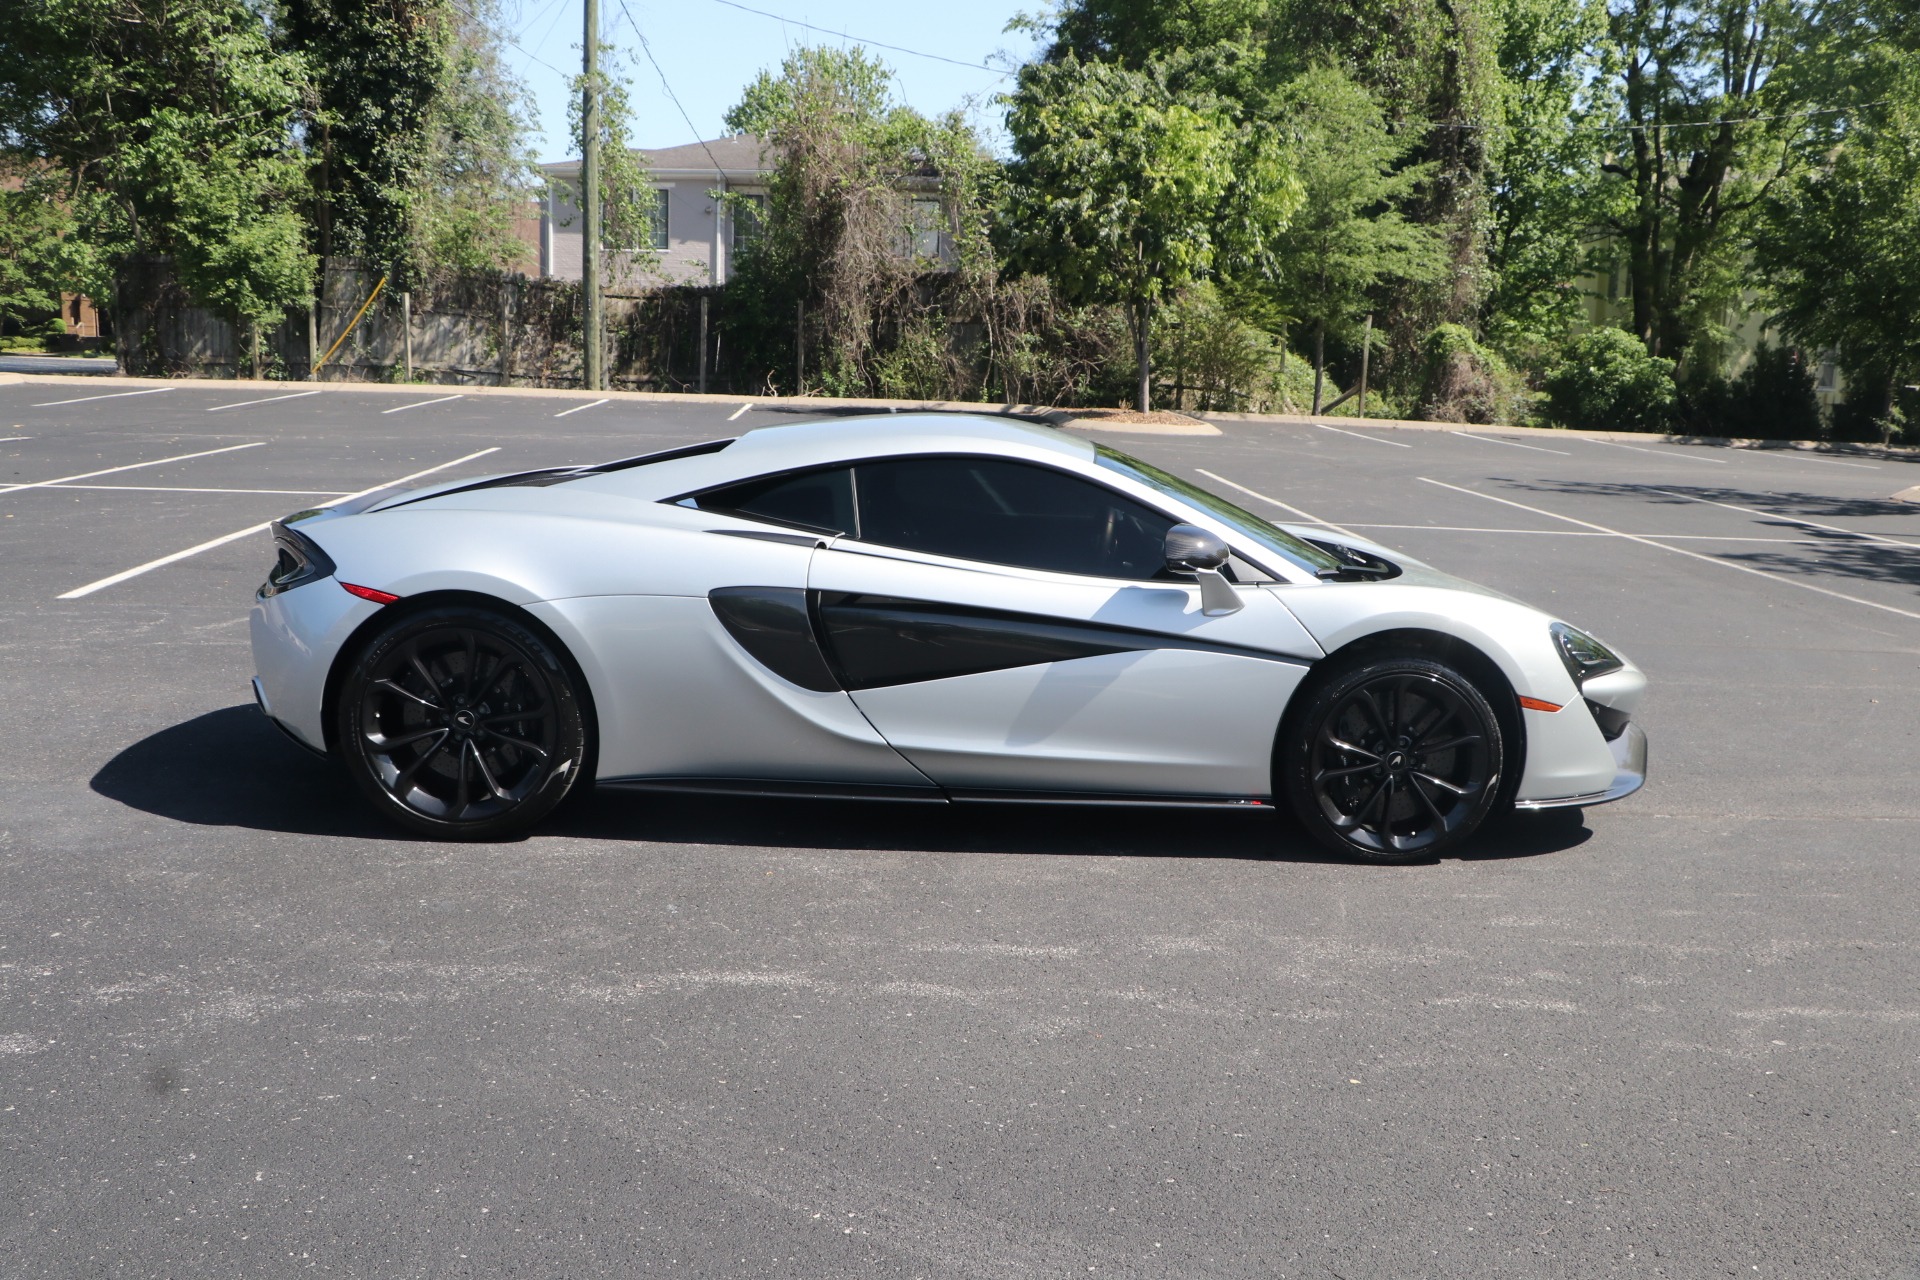 Used 2019 McLaren 570S COUPE W/NAV For Sale ($179,950) | Auto 